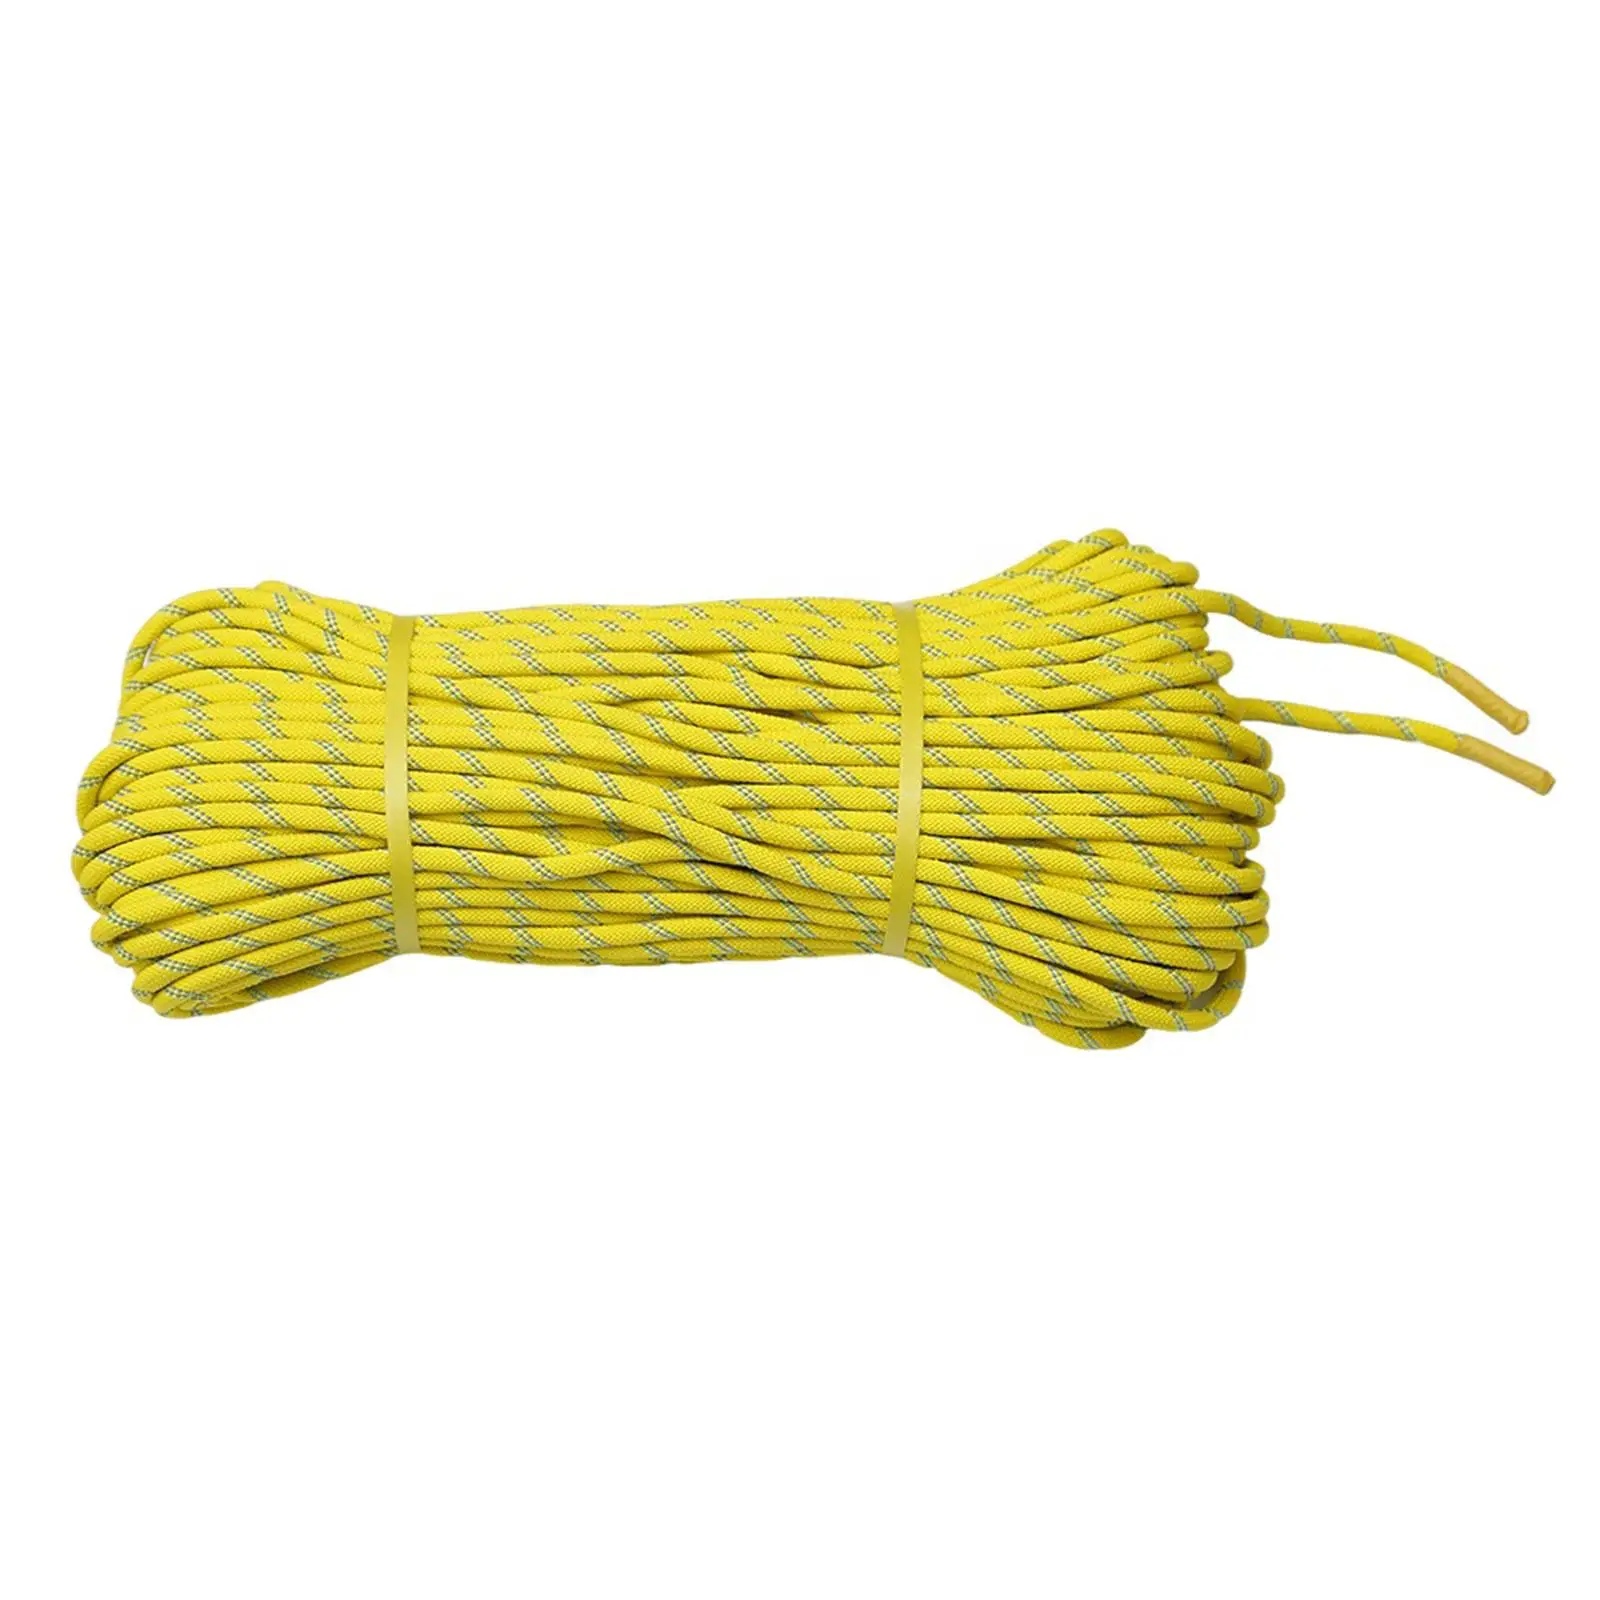 30M Throw Rope Yellow Equipment Flotation Device Floating Rope for Kayaking